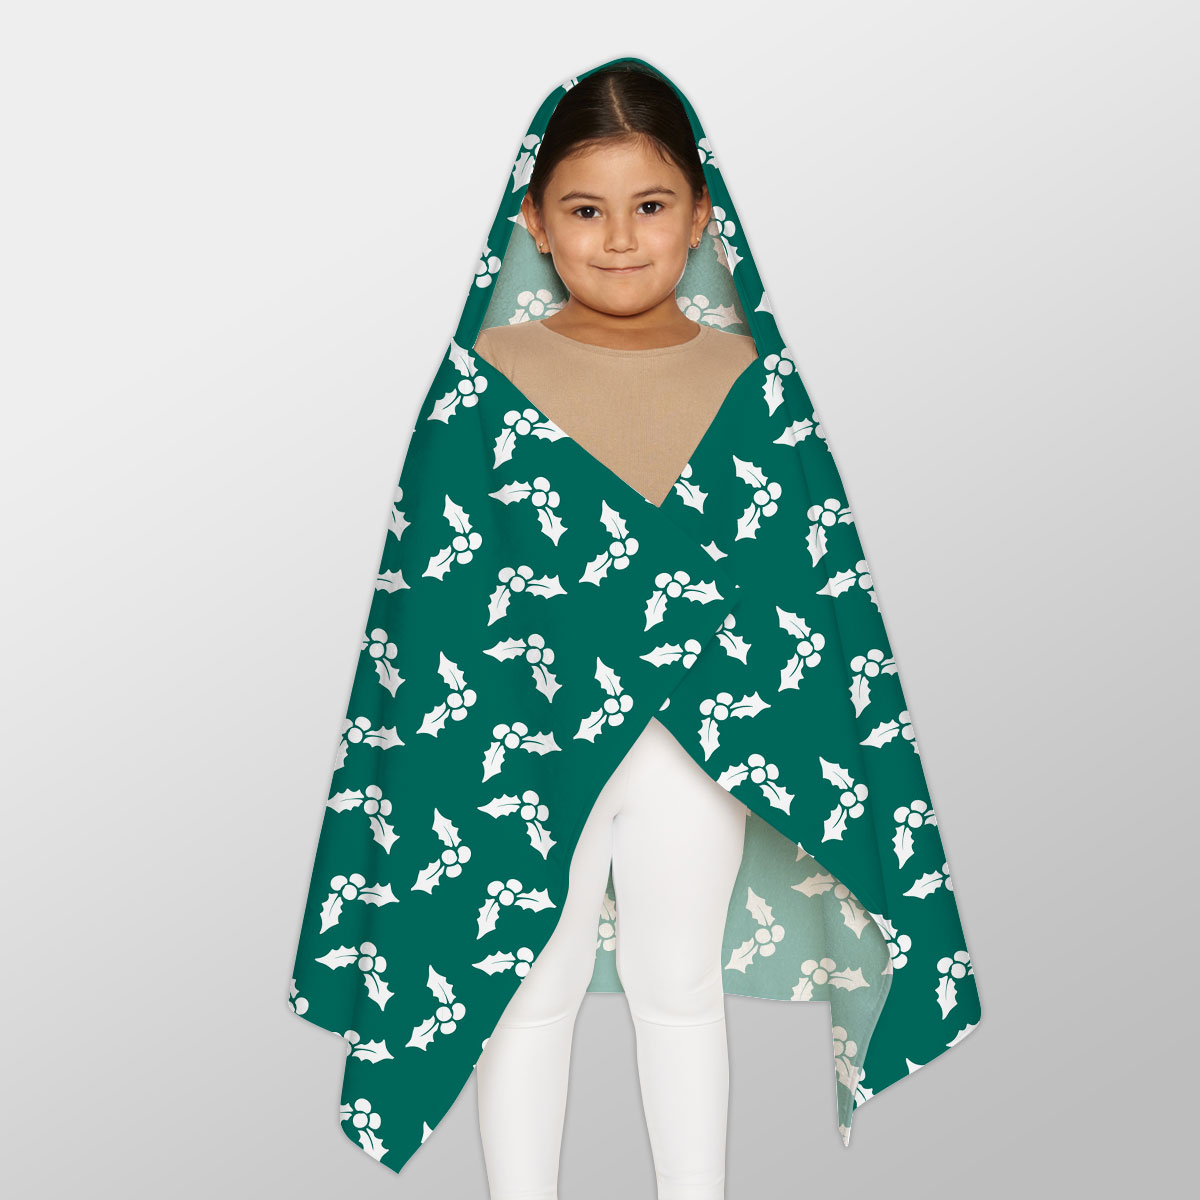 White And Dark Green Holly Leaf Christmas Youth Hooded Towel